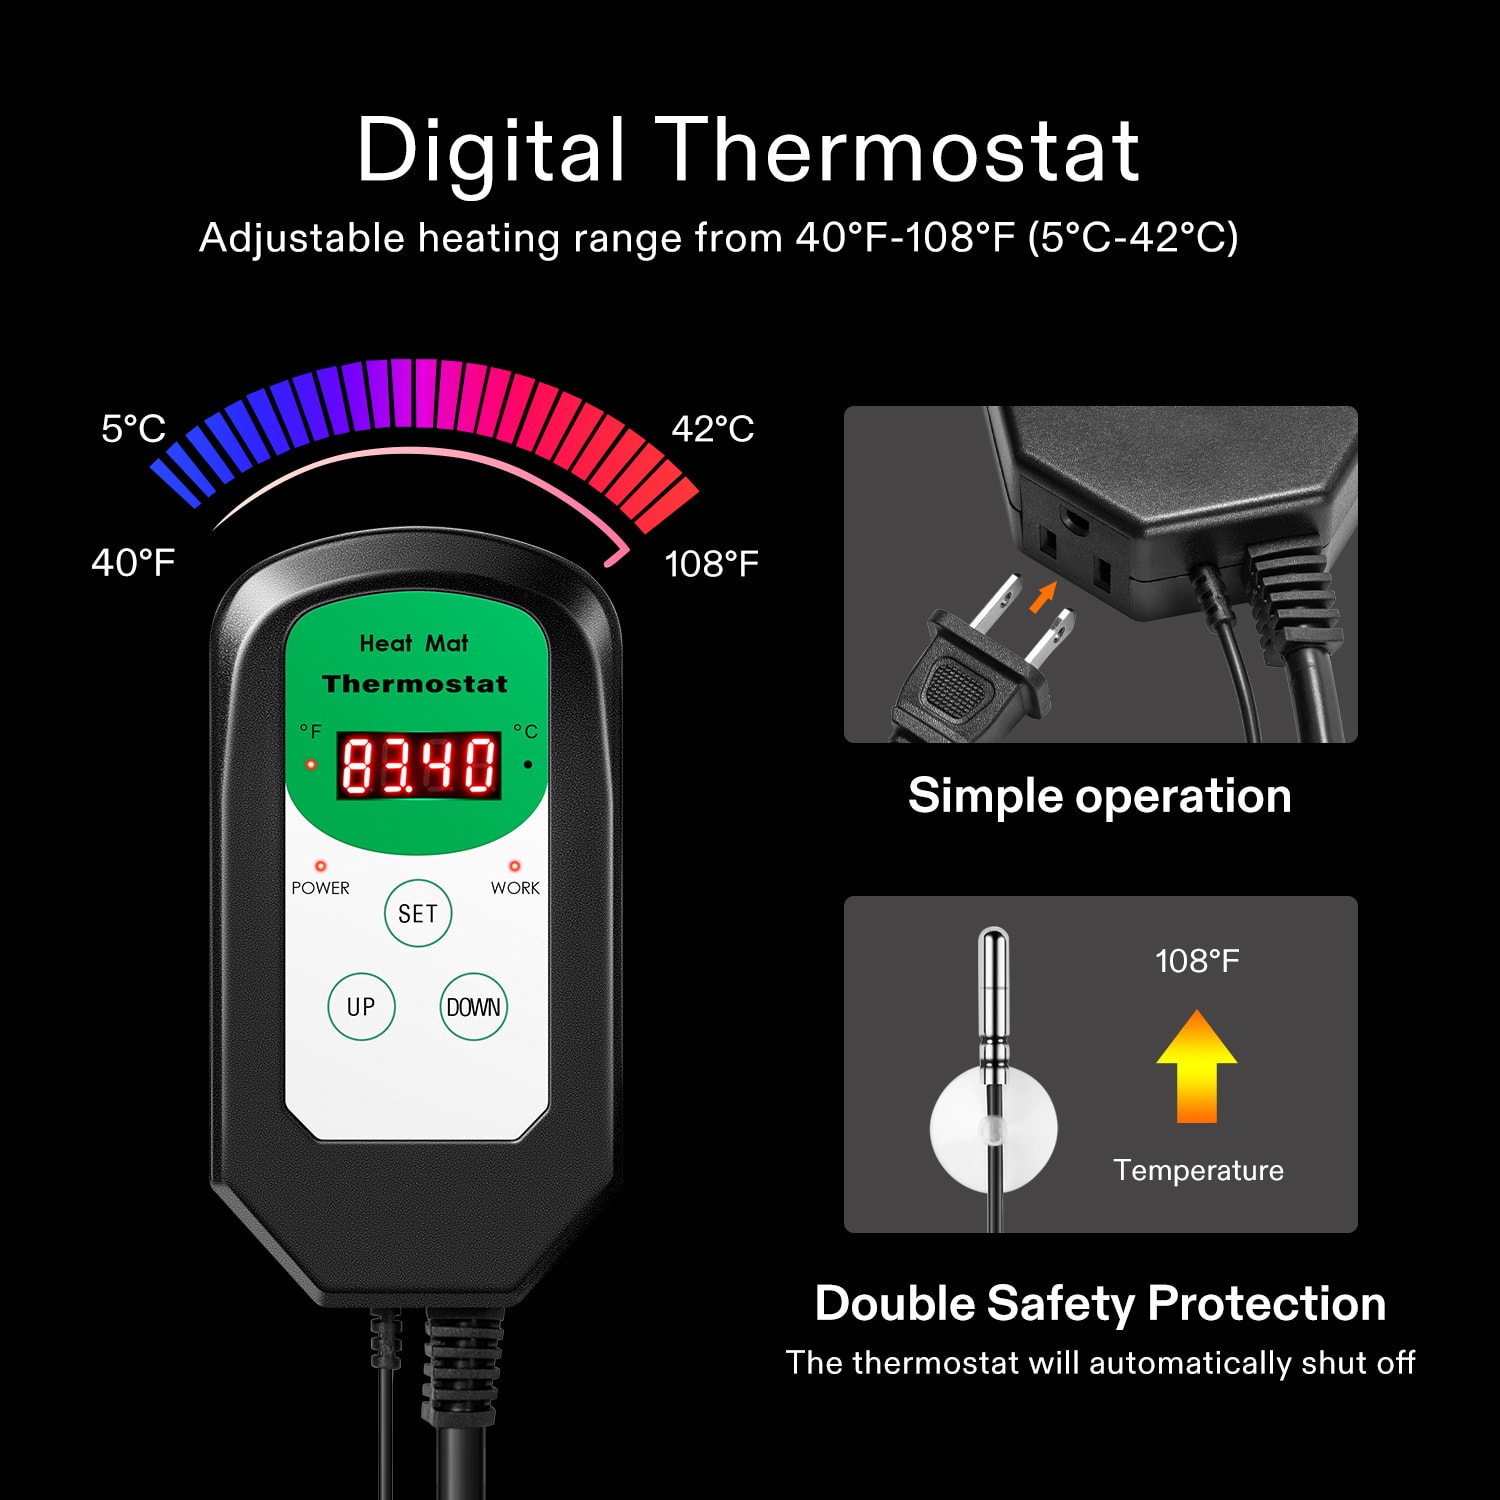 VIVOSUN 1500W Digital Temperature Controller, 2-Stage Outlet Thermostat  Heating and Cooling Mode, Thermostat with Dual LED Display, for Homebrew  Fermenter Greenhouse Terrarium, 110-240V 15A 1500W - Yahoo Shopping